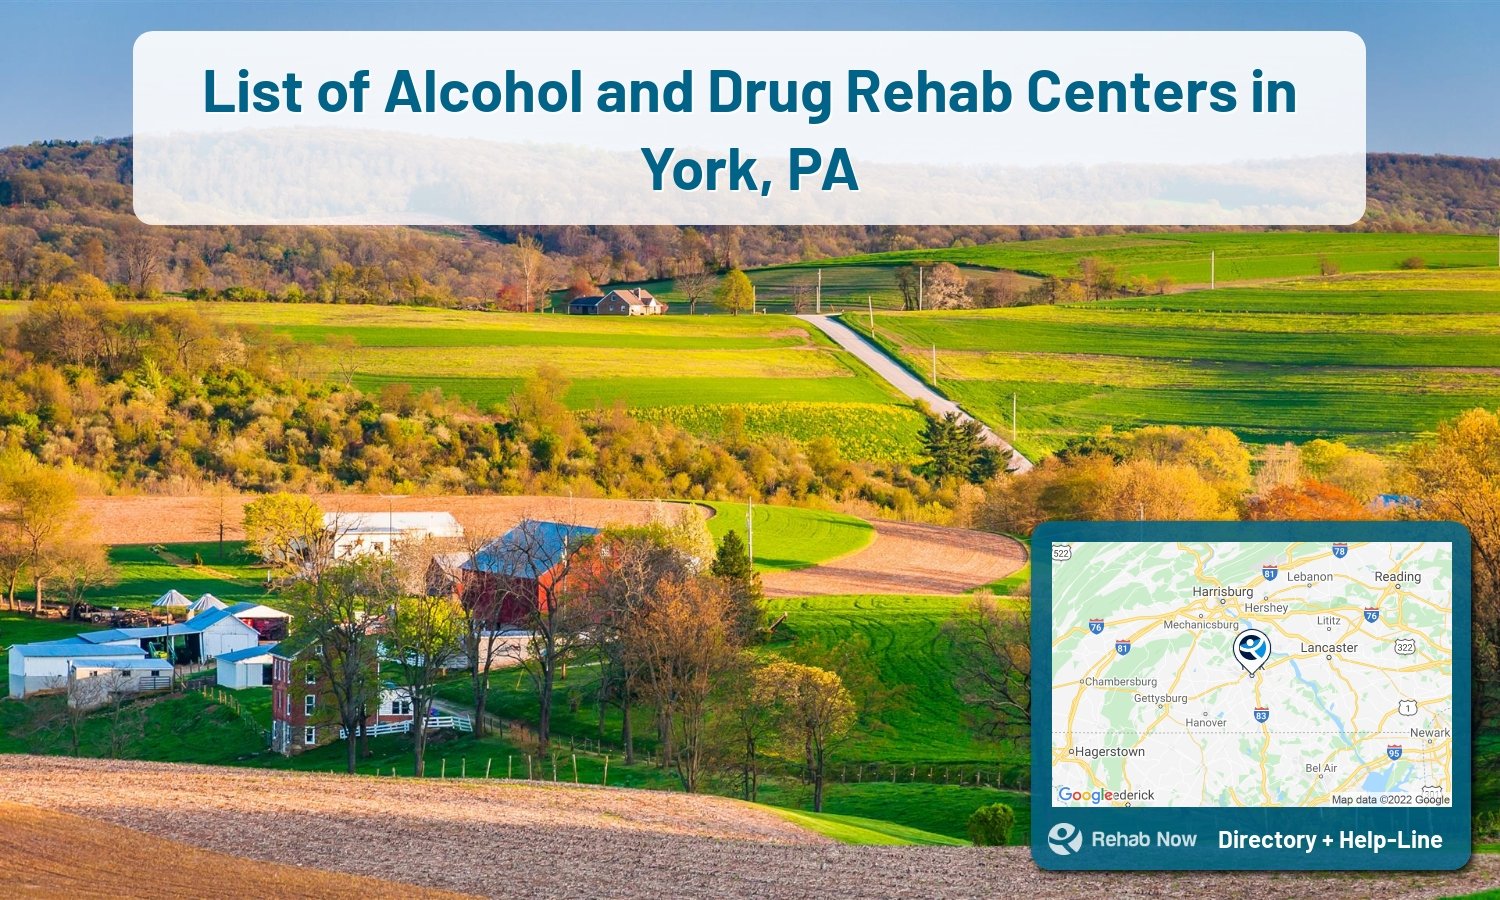 York, PA Treatment Centers. Find drug rehab in York, Pennsylvania, or detox and treatment programs. Get the right help now!